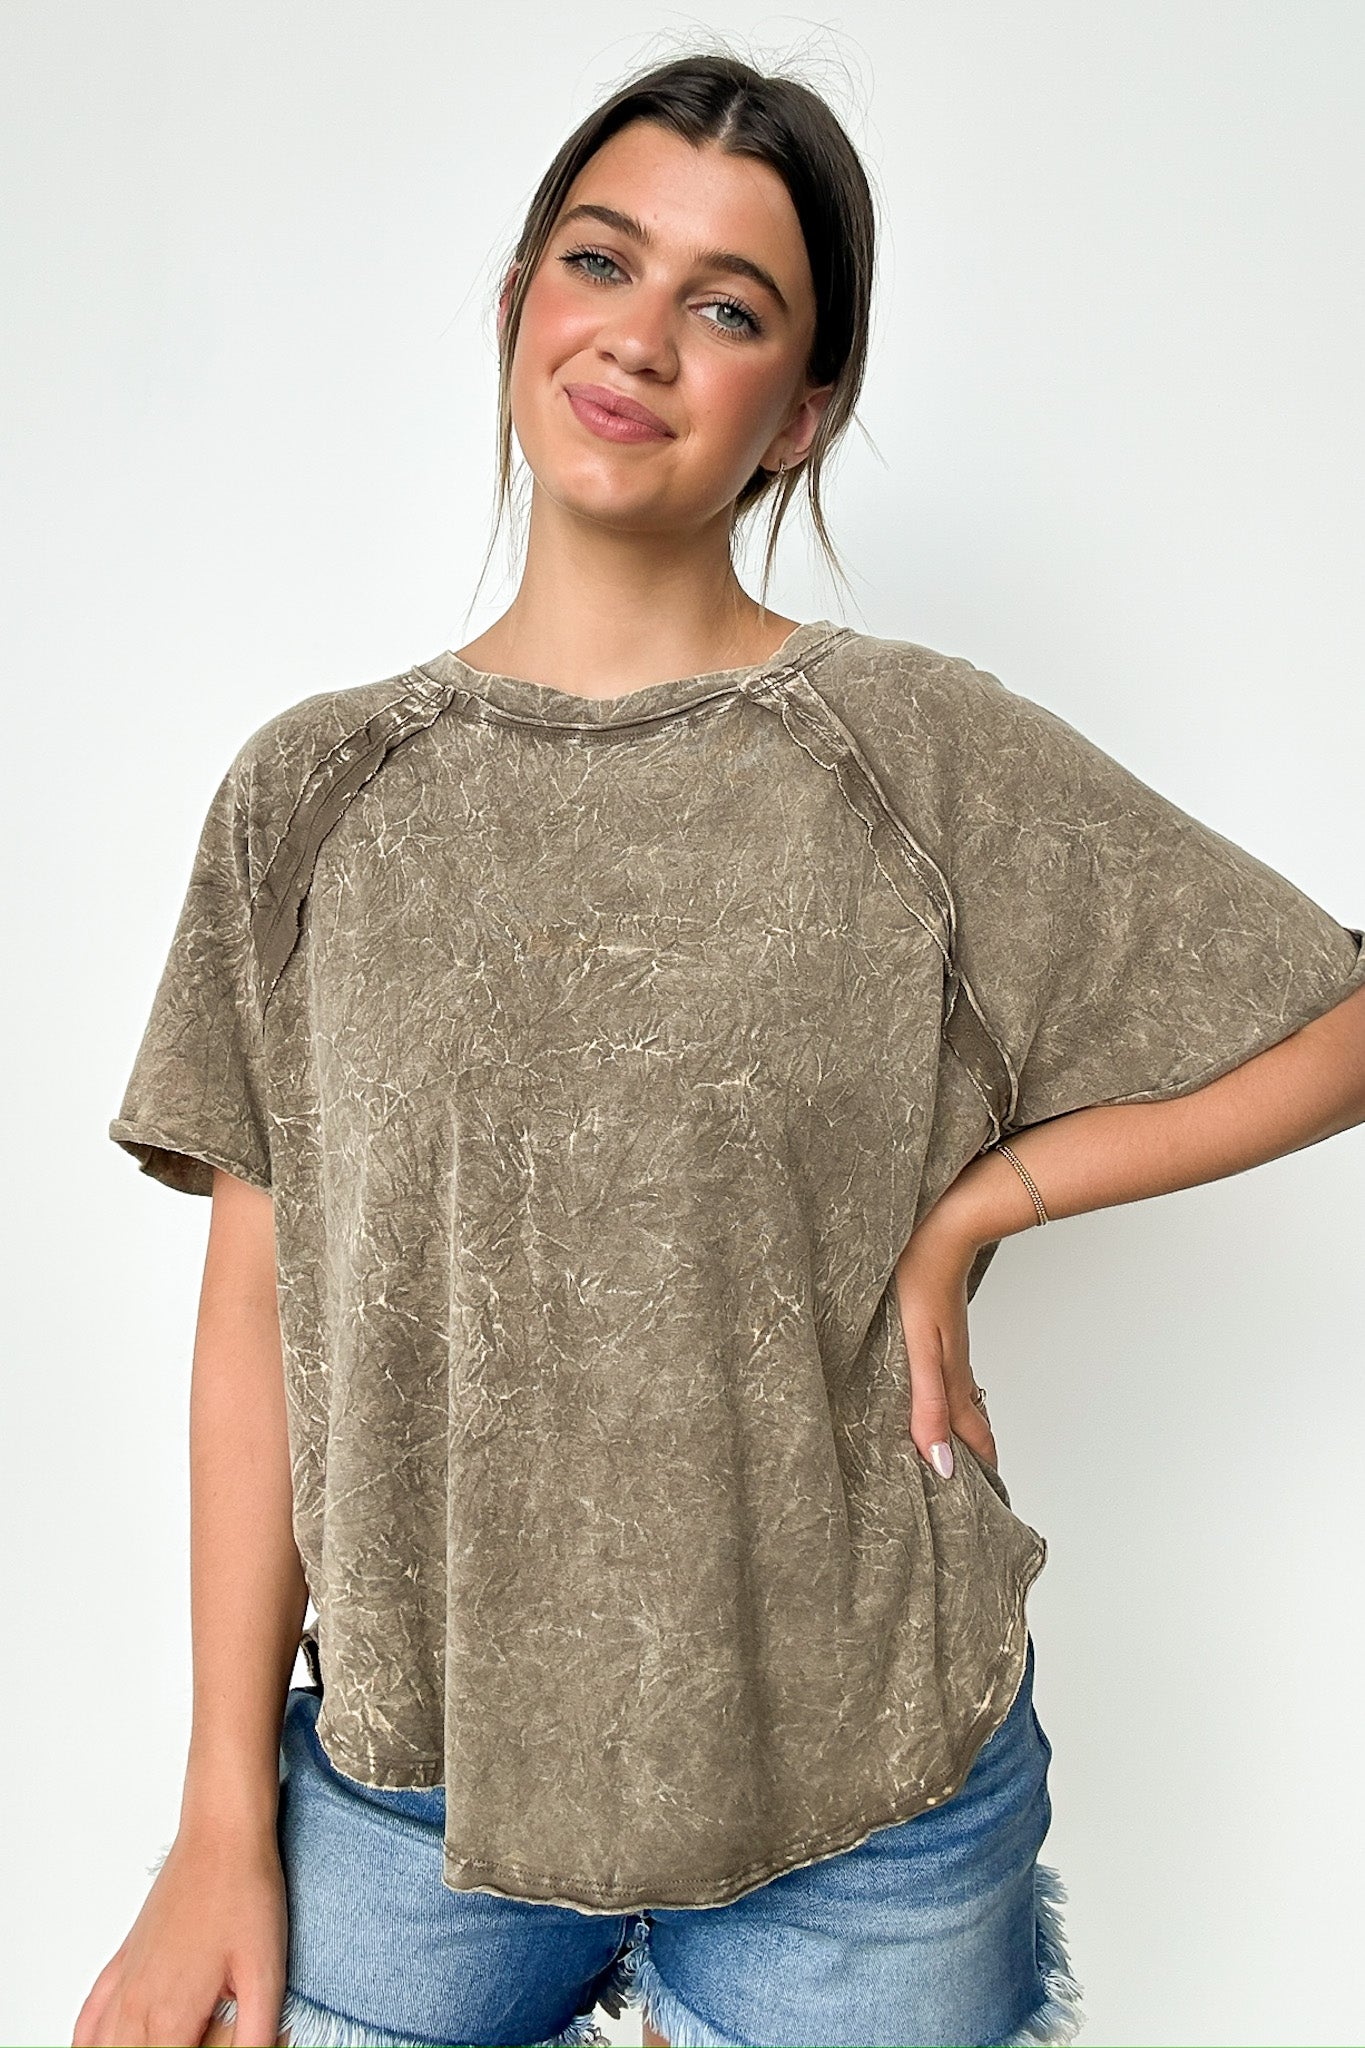  Carowyn Mineral Wash Relaxed Fit Top - BACK IN STOCK - Madison and Mallory